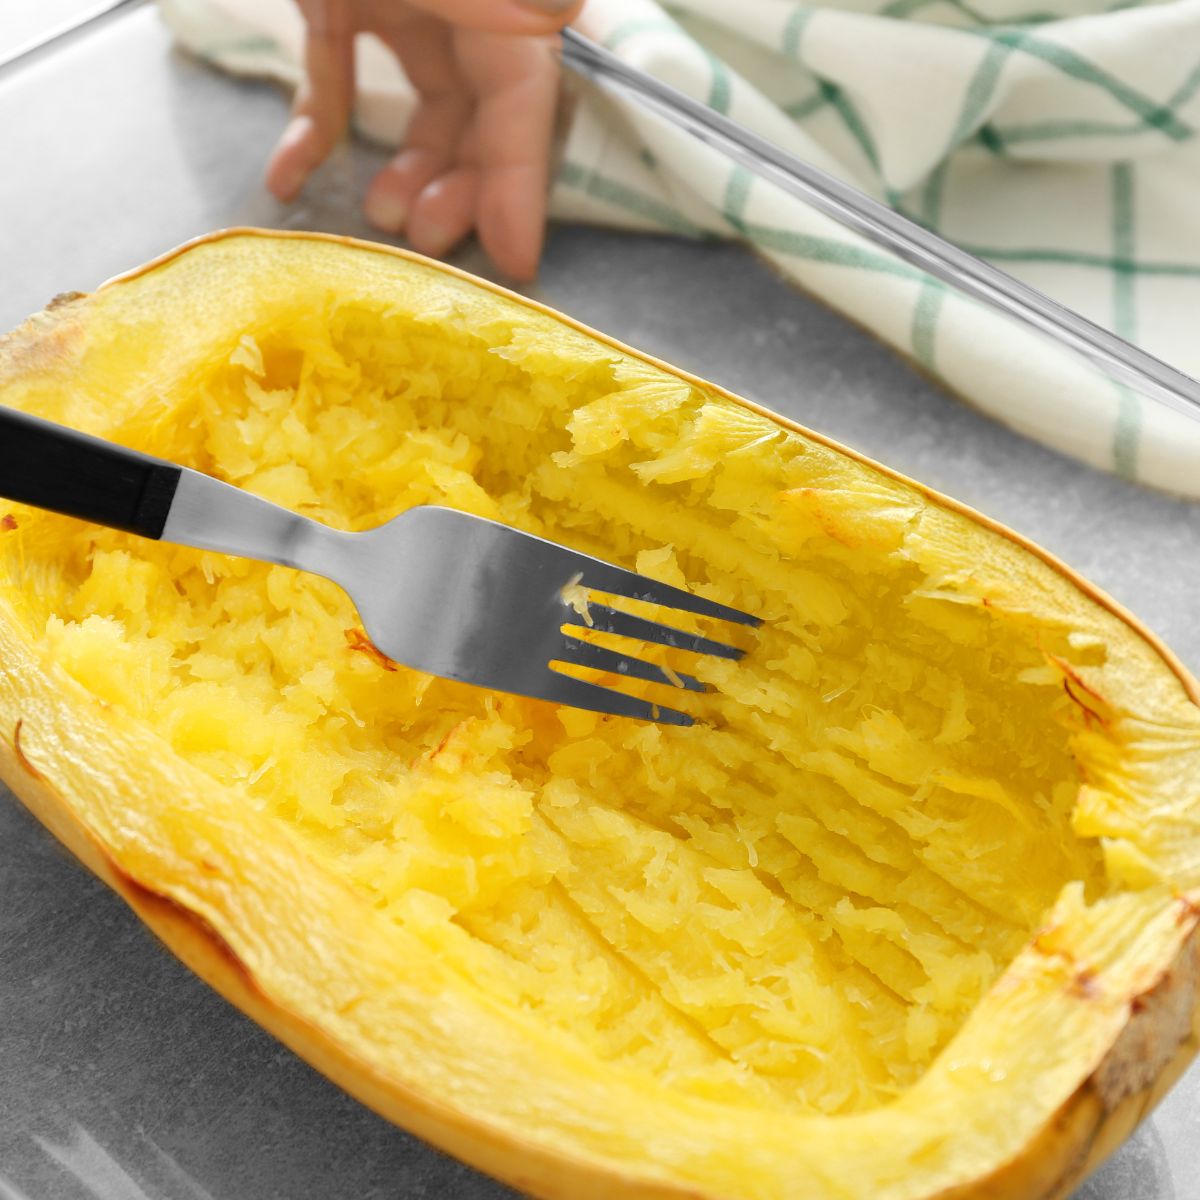 A fork fluffs the inside of a cooked spaghetti squash on a kitchen counter for a recipe index, with a person's hand visible.